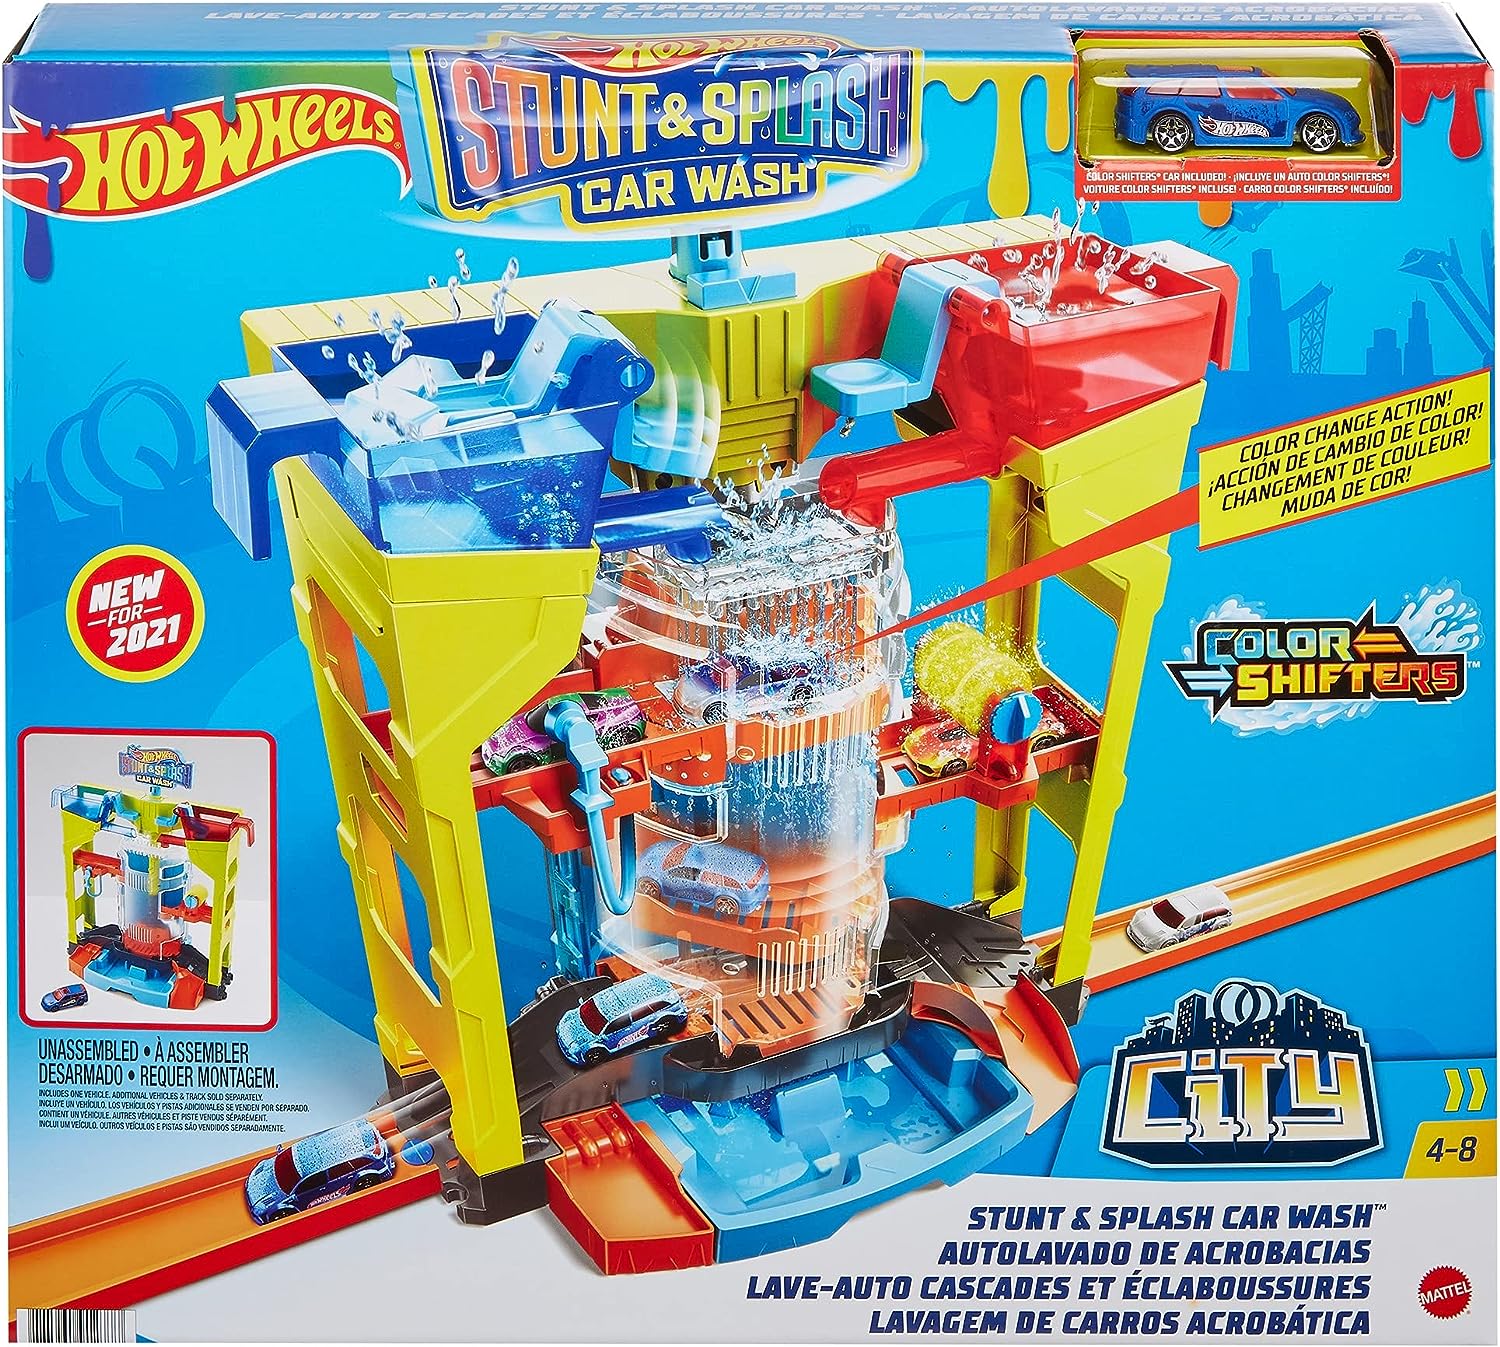  Hot Wheels Track Set and Toy Car, Large-Scale